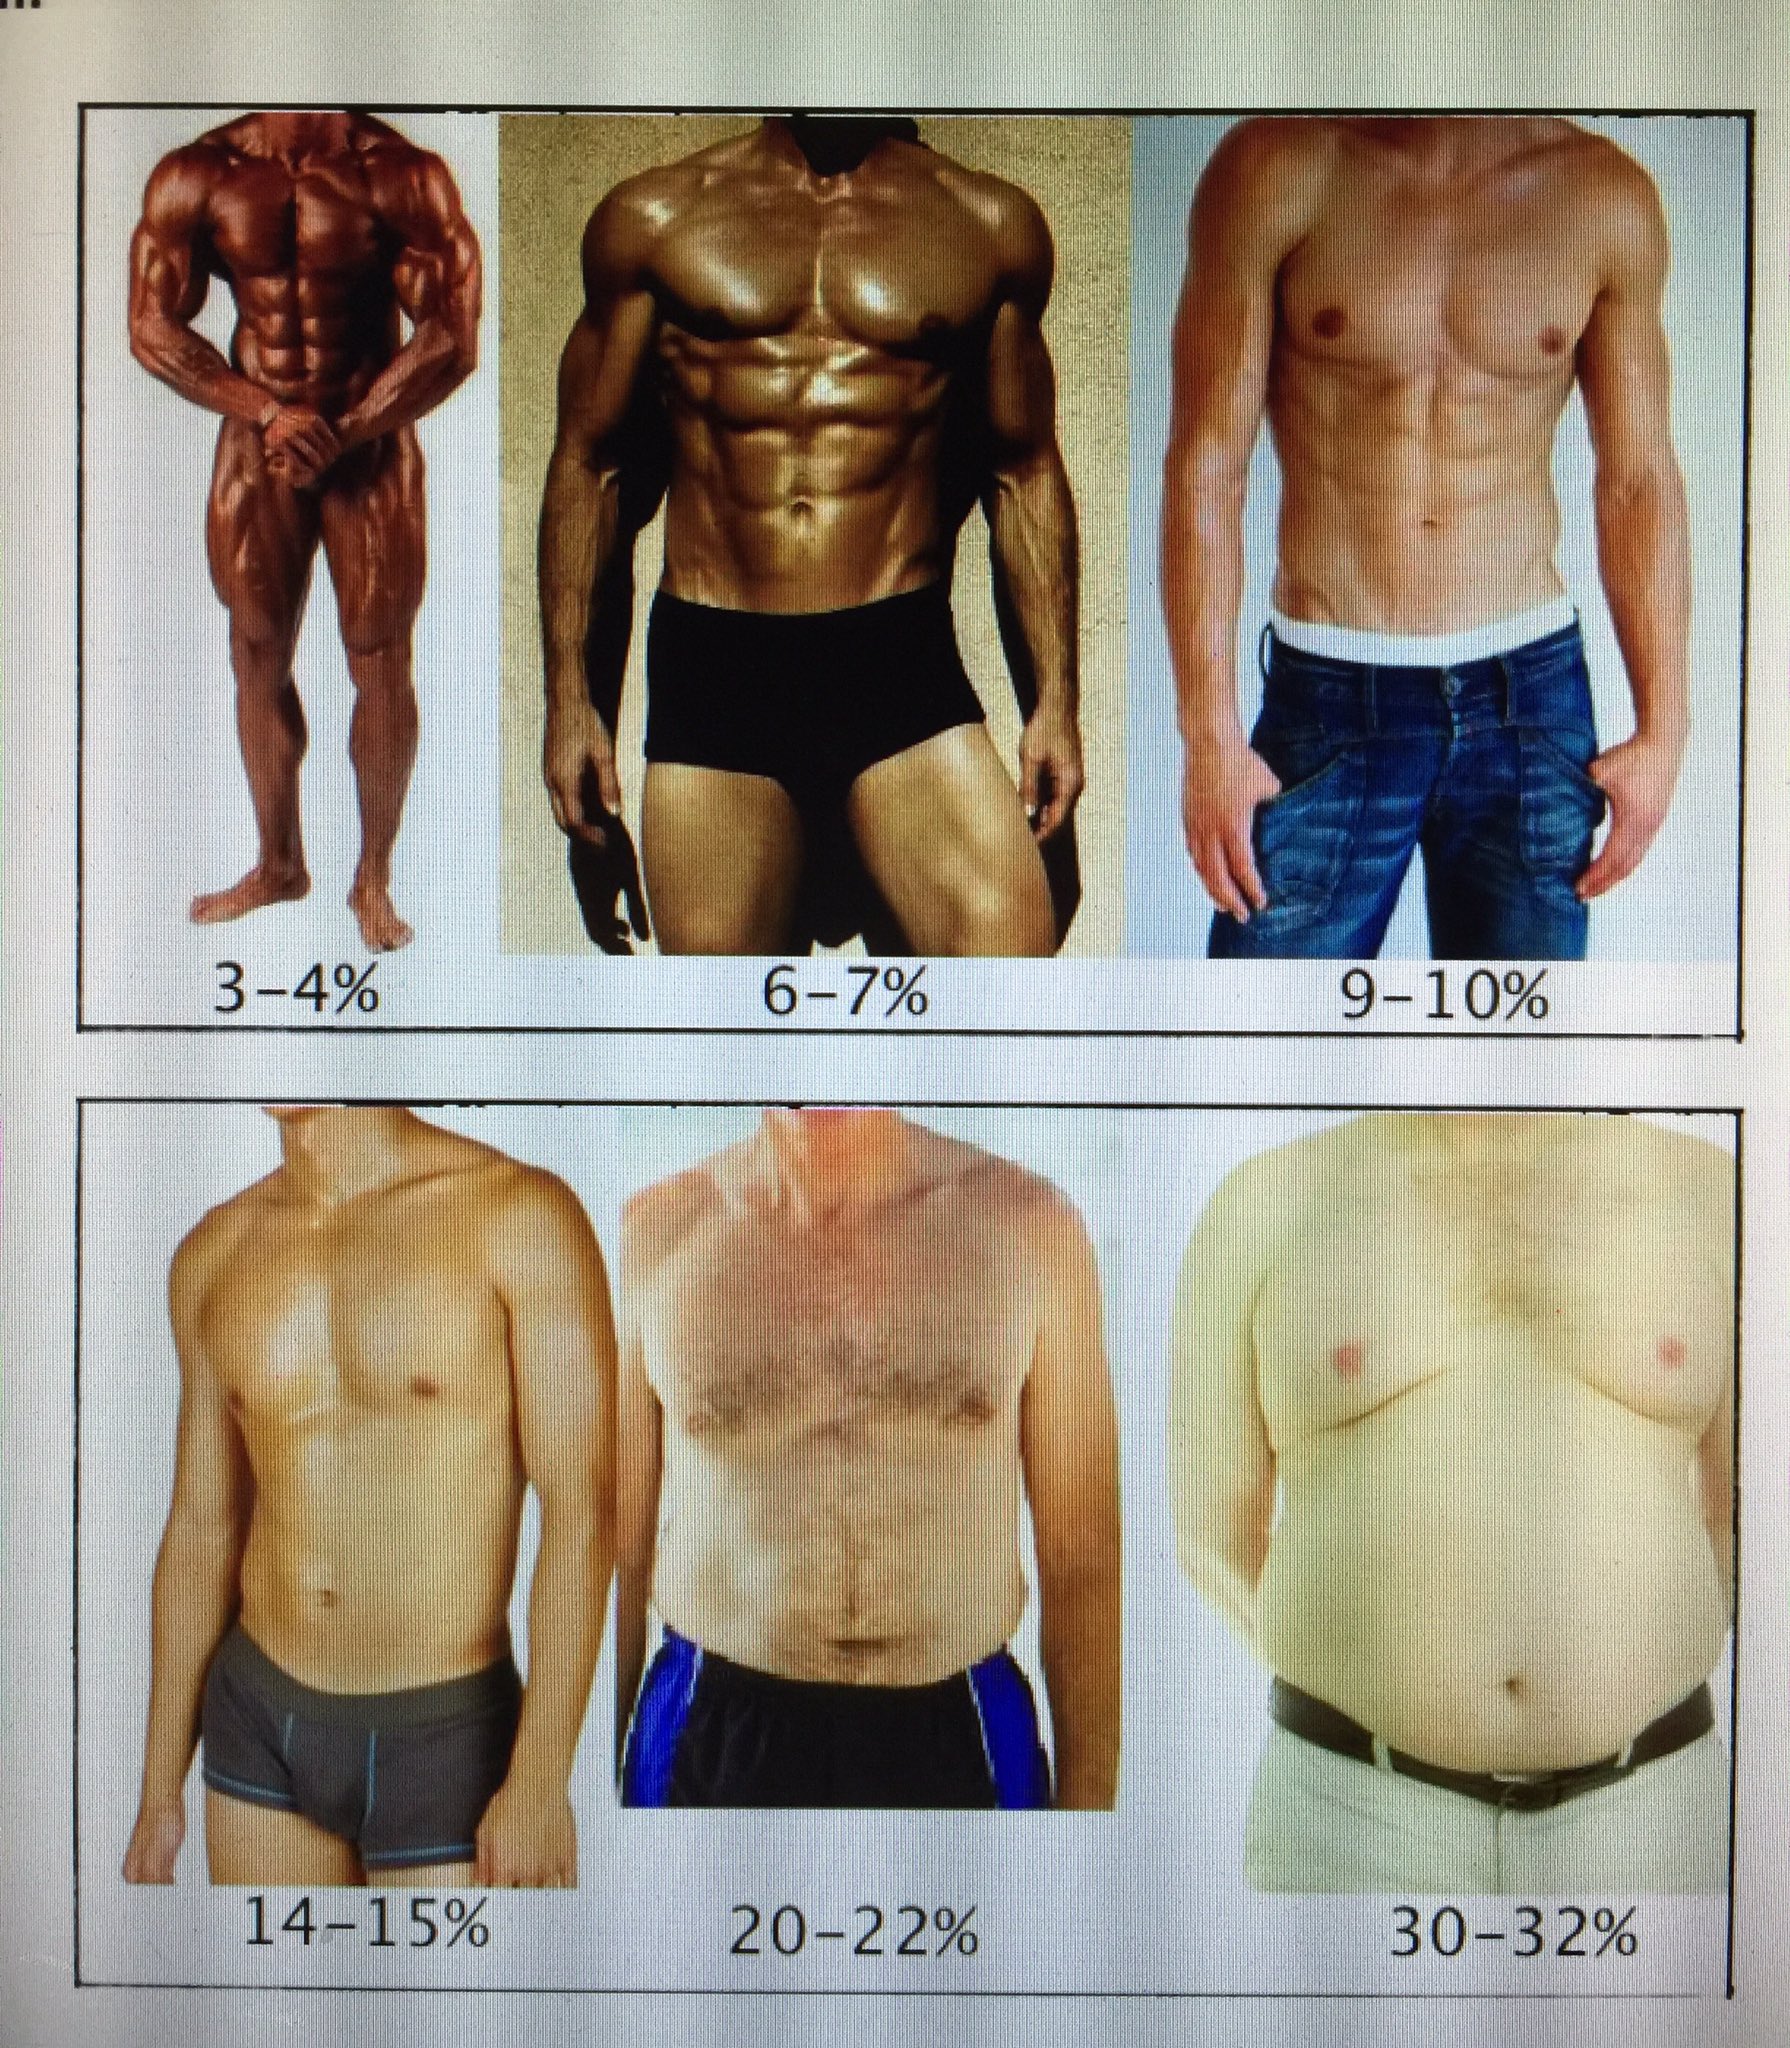 Pete McKenzie on Twitter: "Body fat percentages. What body type do you  think best represents Pablo? #17% Wait it's not there? #controversy  https://t.co/yiK1j4OcRw" / Twitter